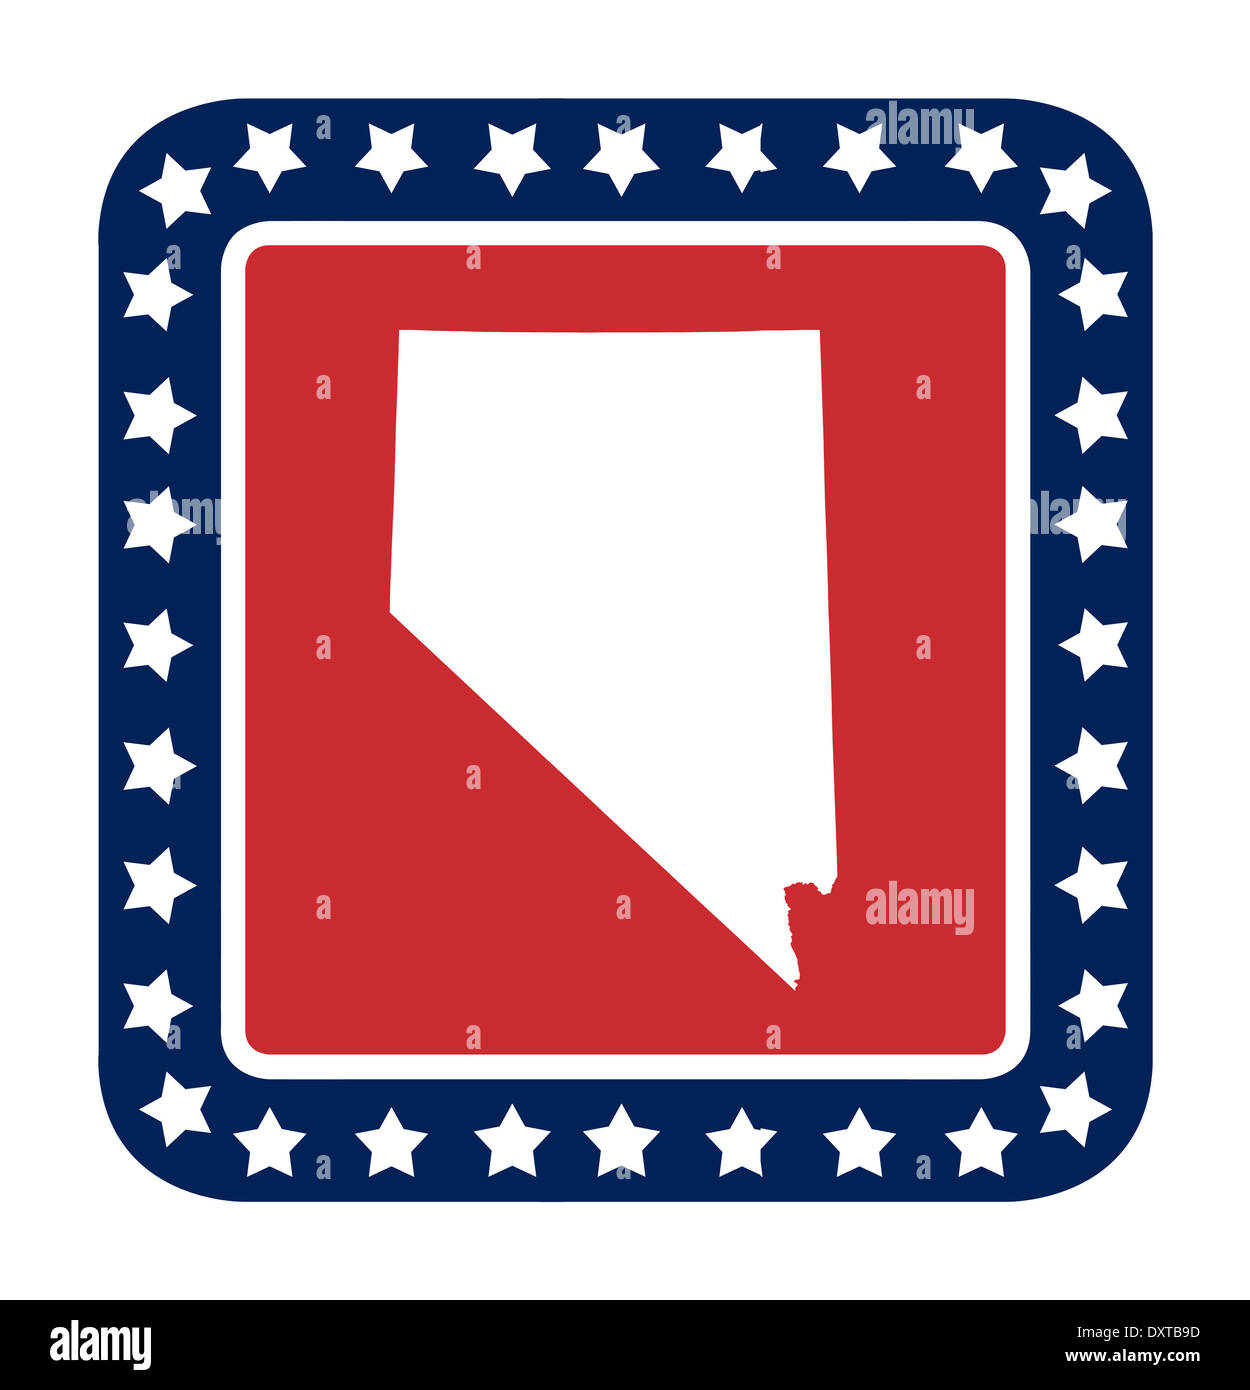 Nevada state button on American flag in flat web design style, isolated on white background. Stock Photo